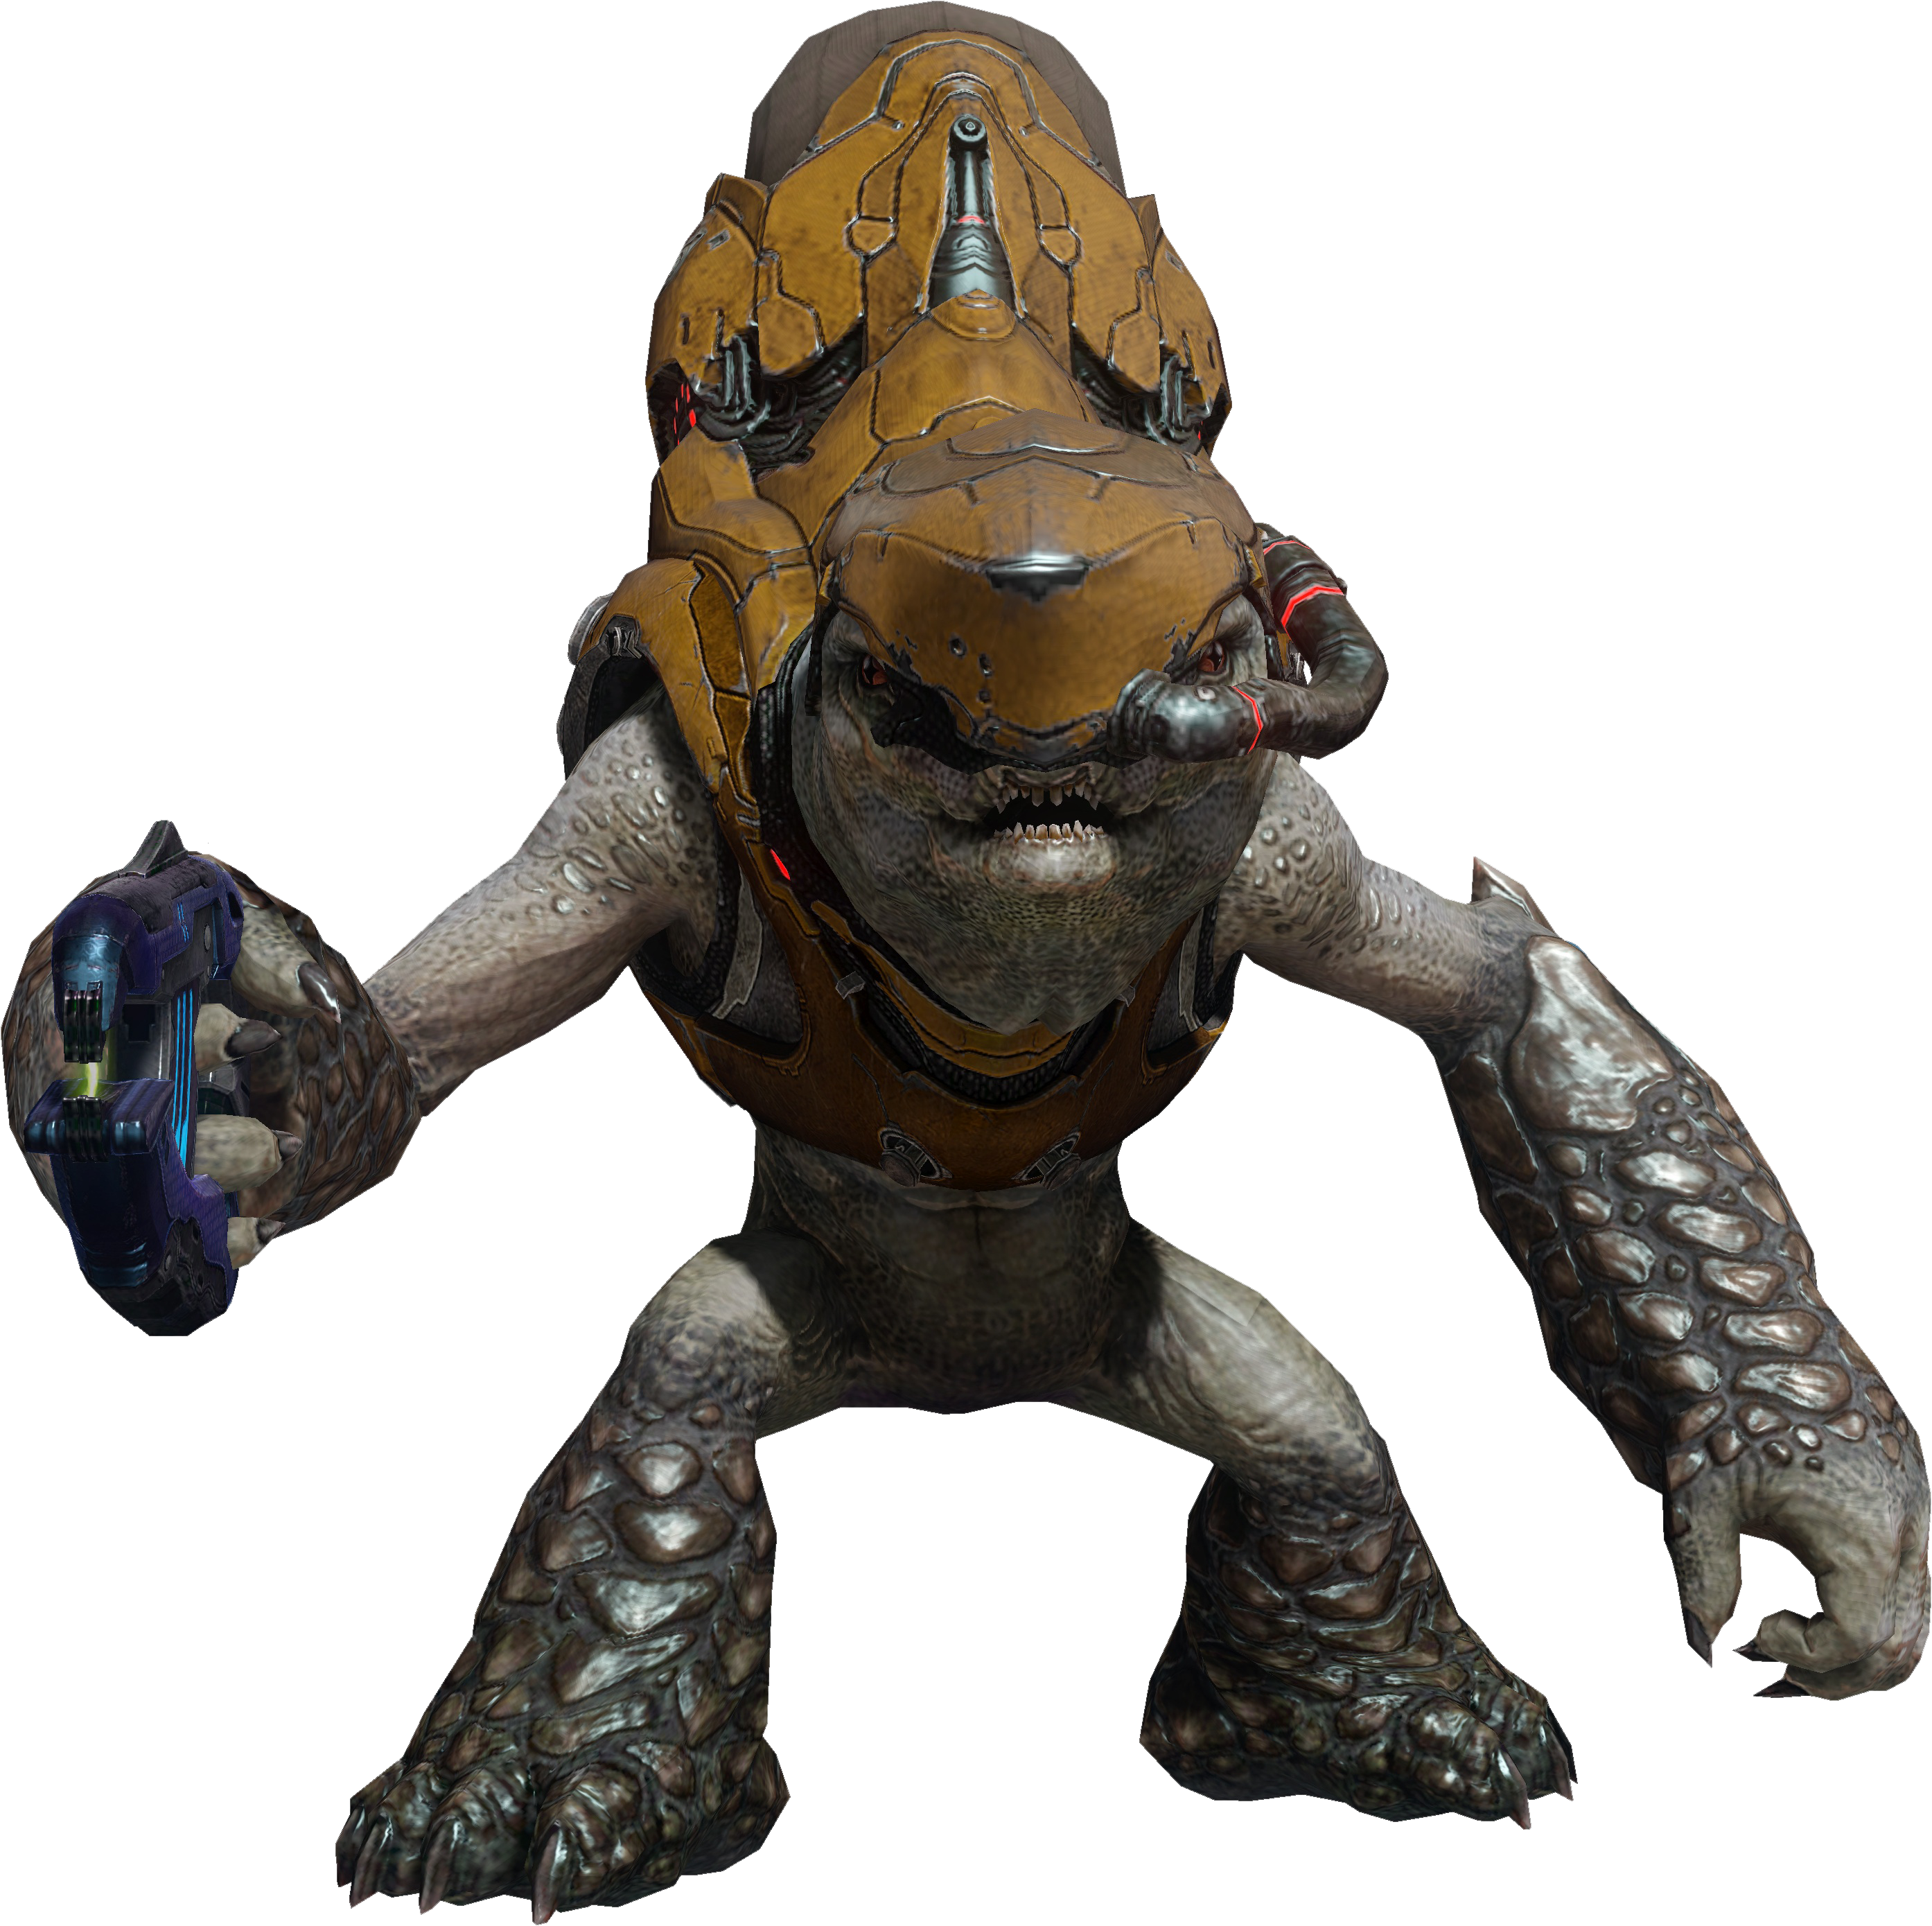 Halo4 Grunt.png